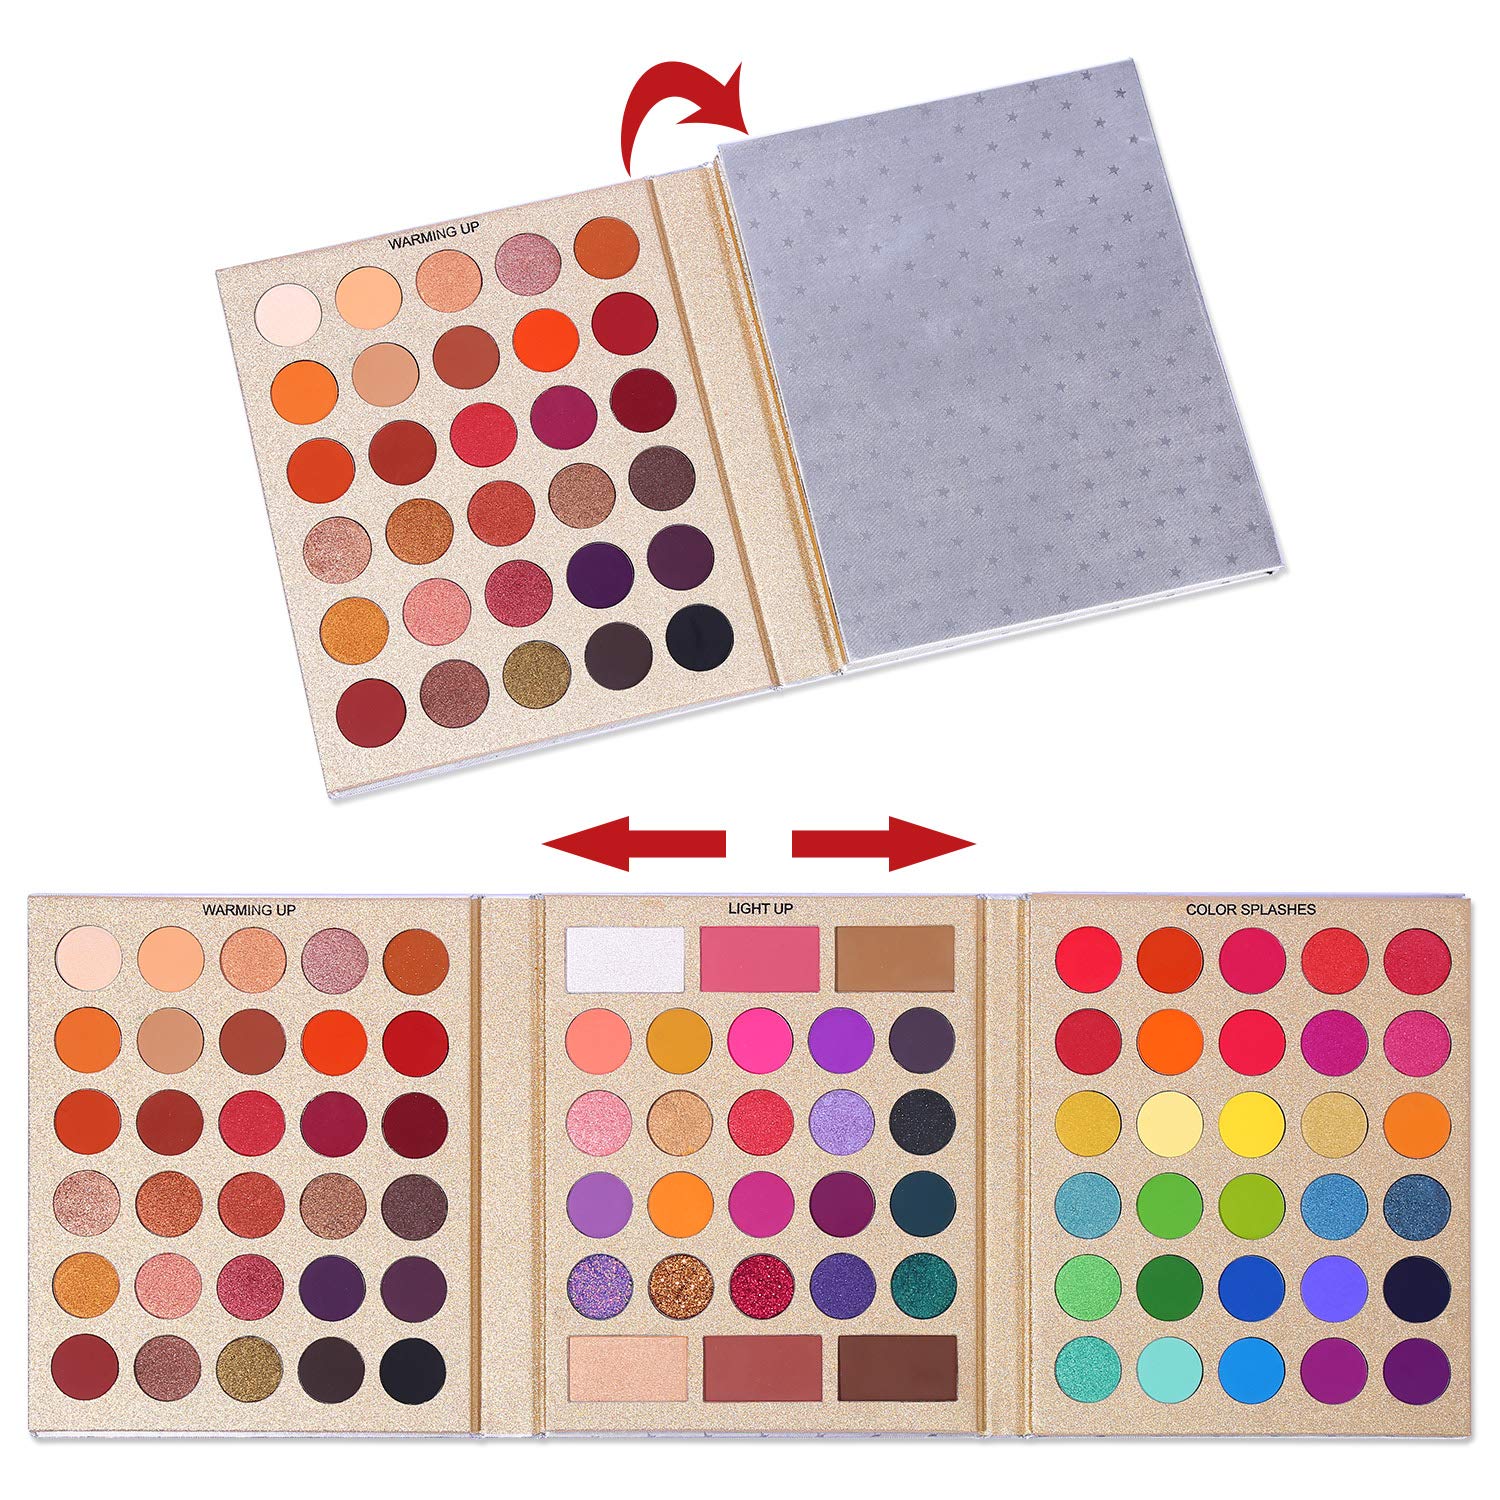 Pretty All Set Eyeshadow Palette Holiday Gift Set Pro 86 Colors Makeup Kit Matte Shimmer Eye Shadow Highlighters Contour Blush Powder All In One Makeup Pallet